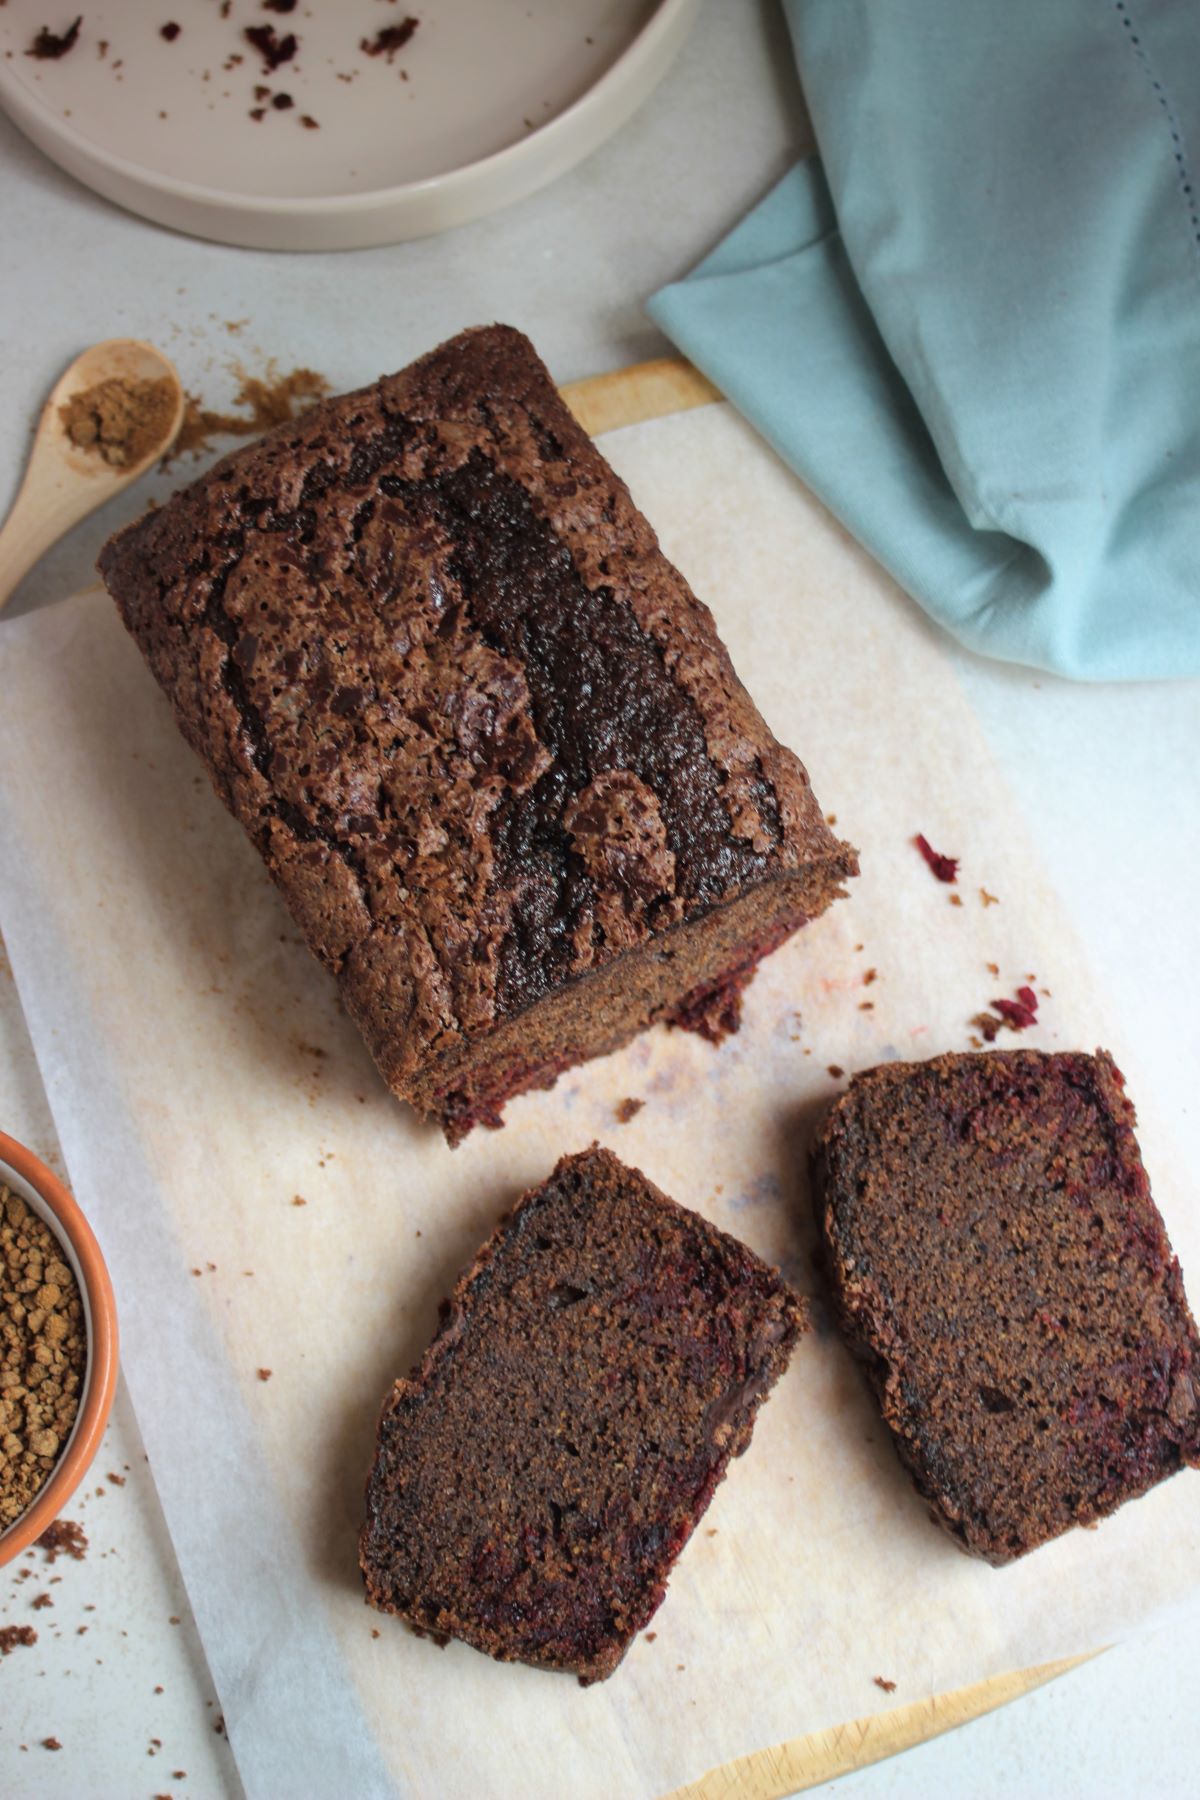 Beetroot and chocolate loaf cake with two slices of it on parchment paper seen from above.